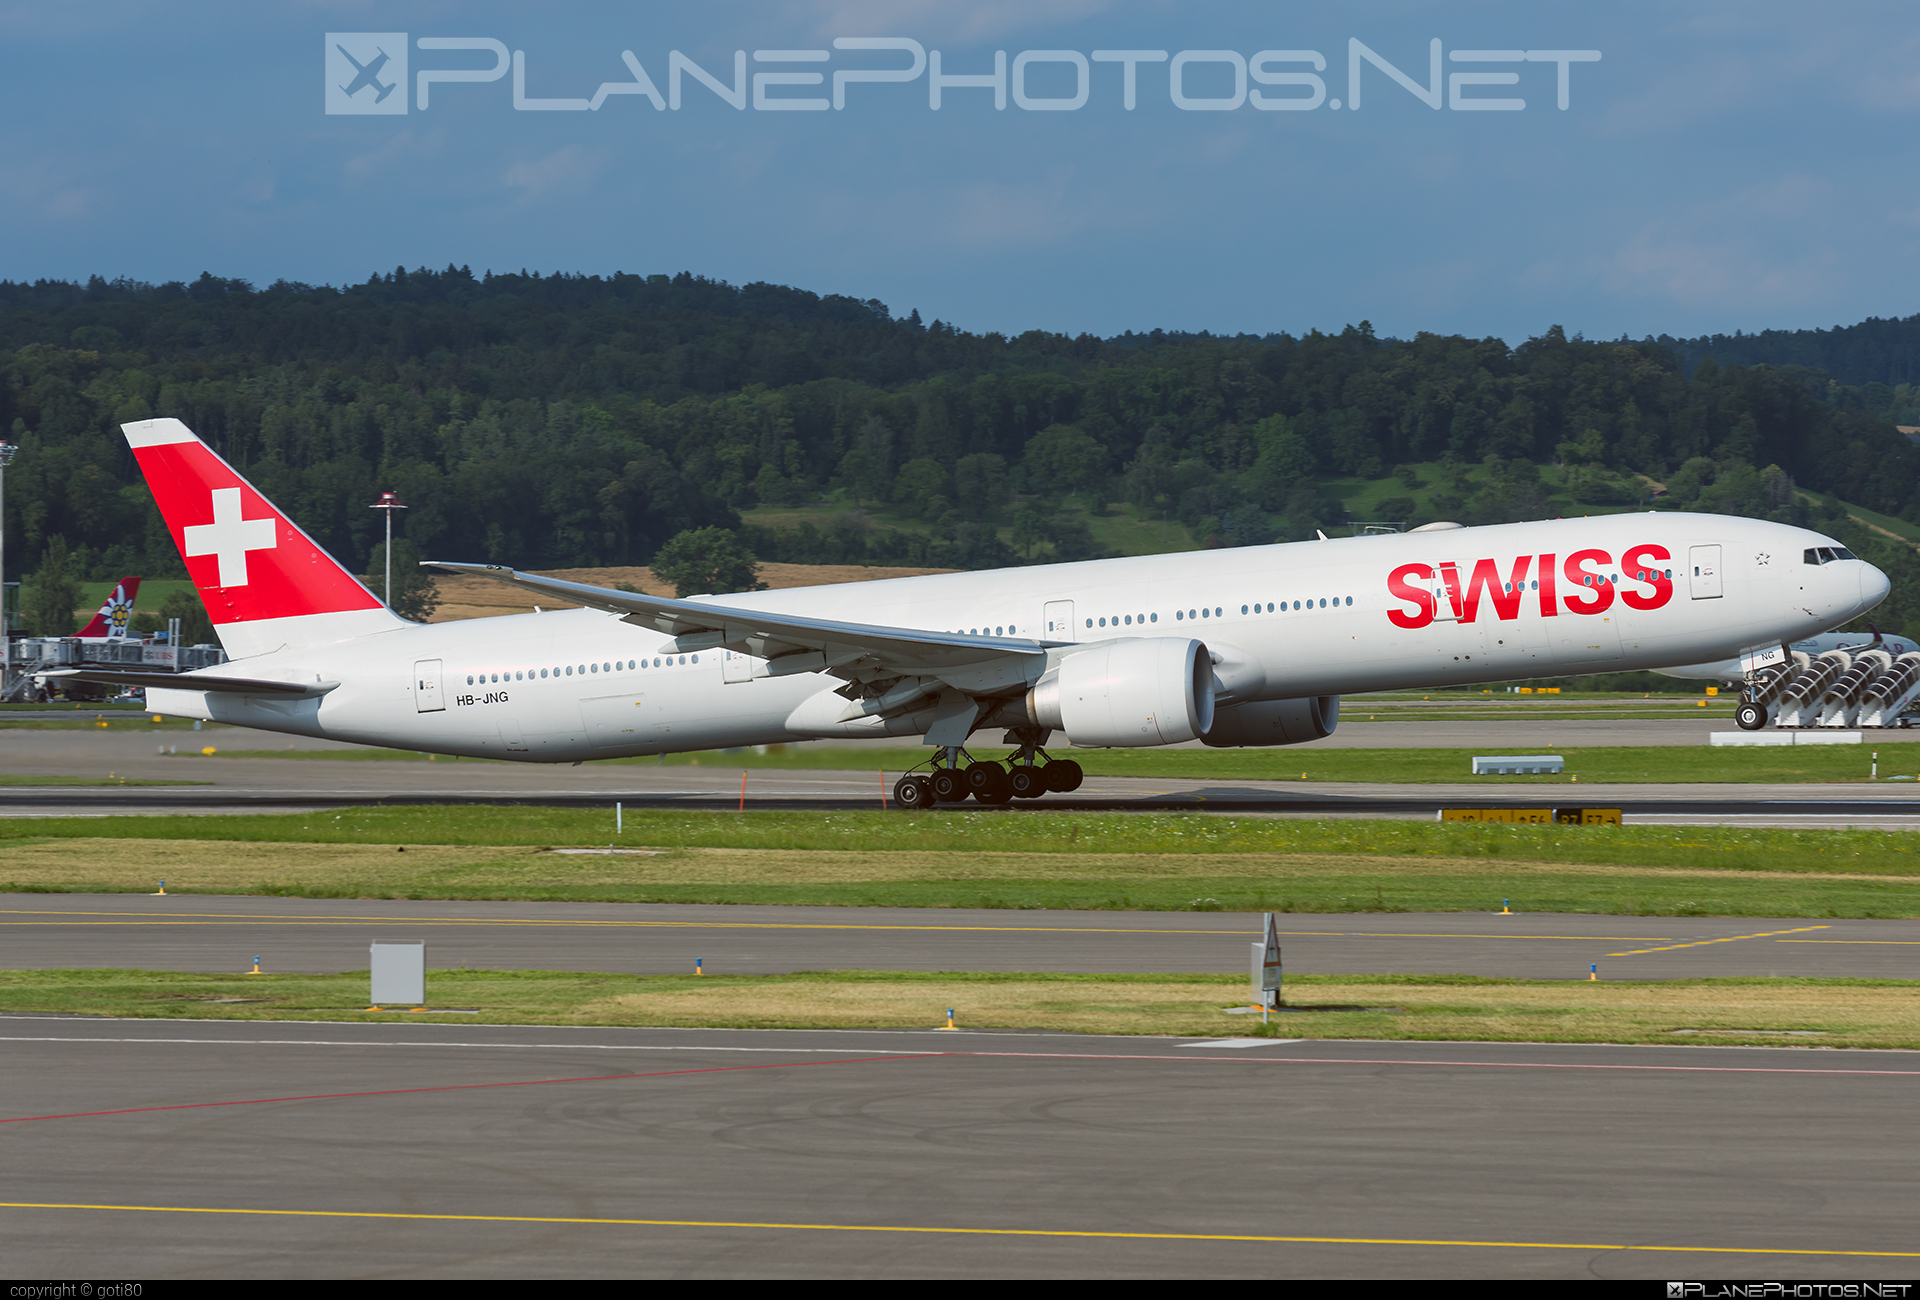 Boeing 777-300ER - HB-JNG operated by Swiss International Air Lines #b777 #b777er #boeing #boeing777 #swiss #swissairlines #tripleseven